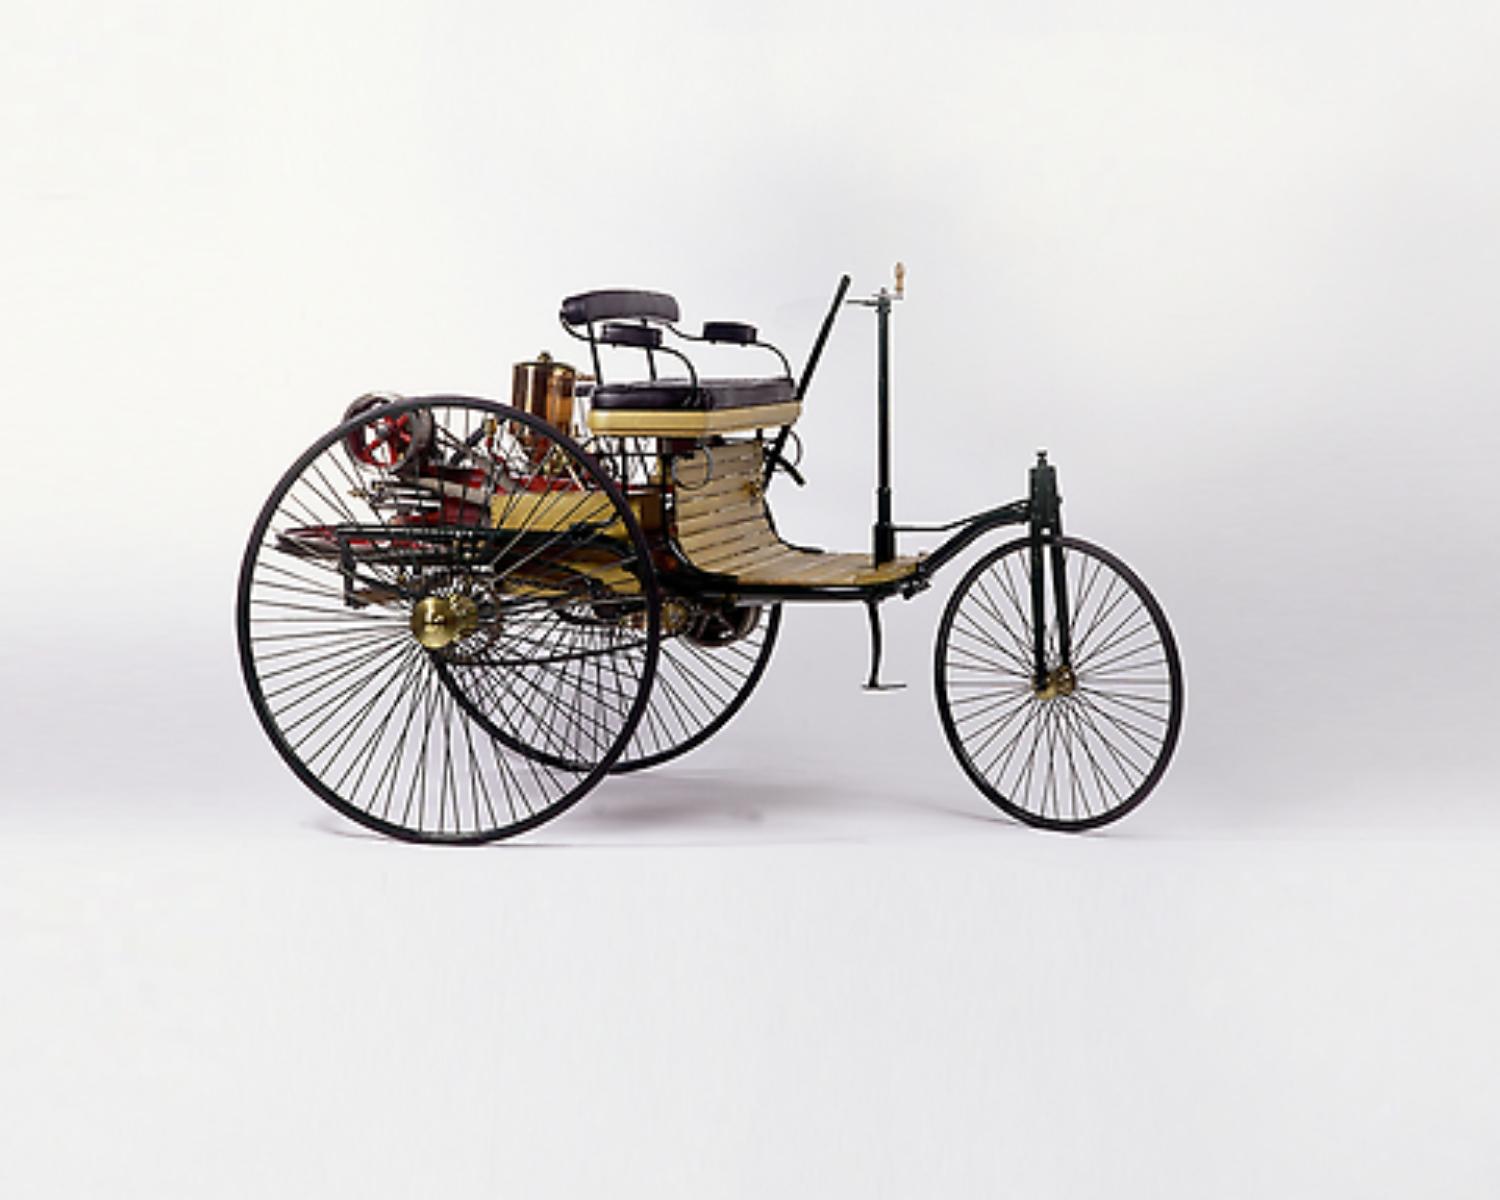 1886 – The first car is invented 